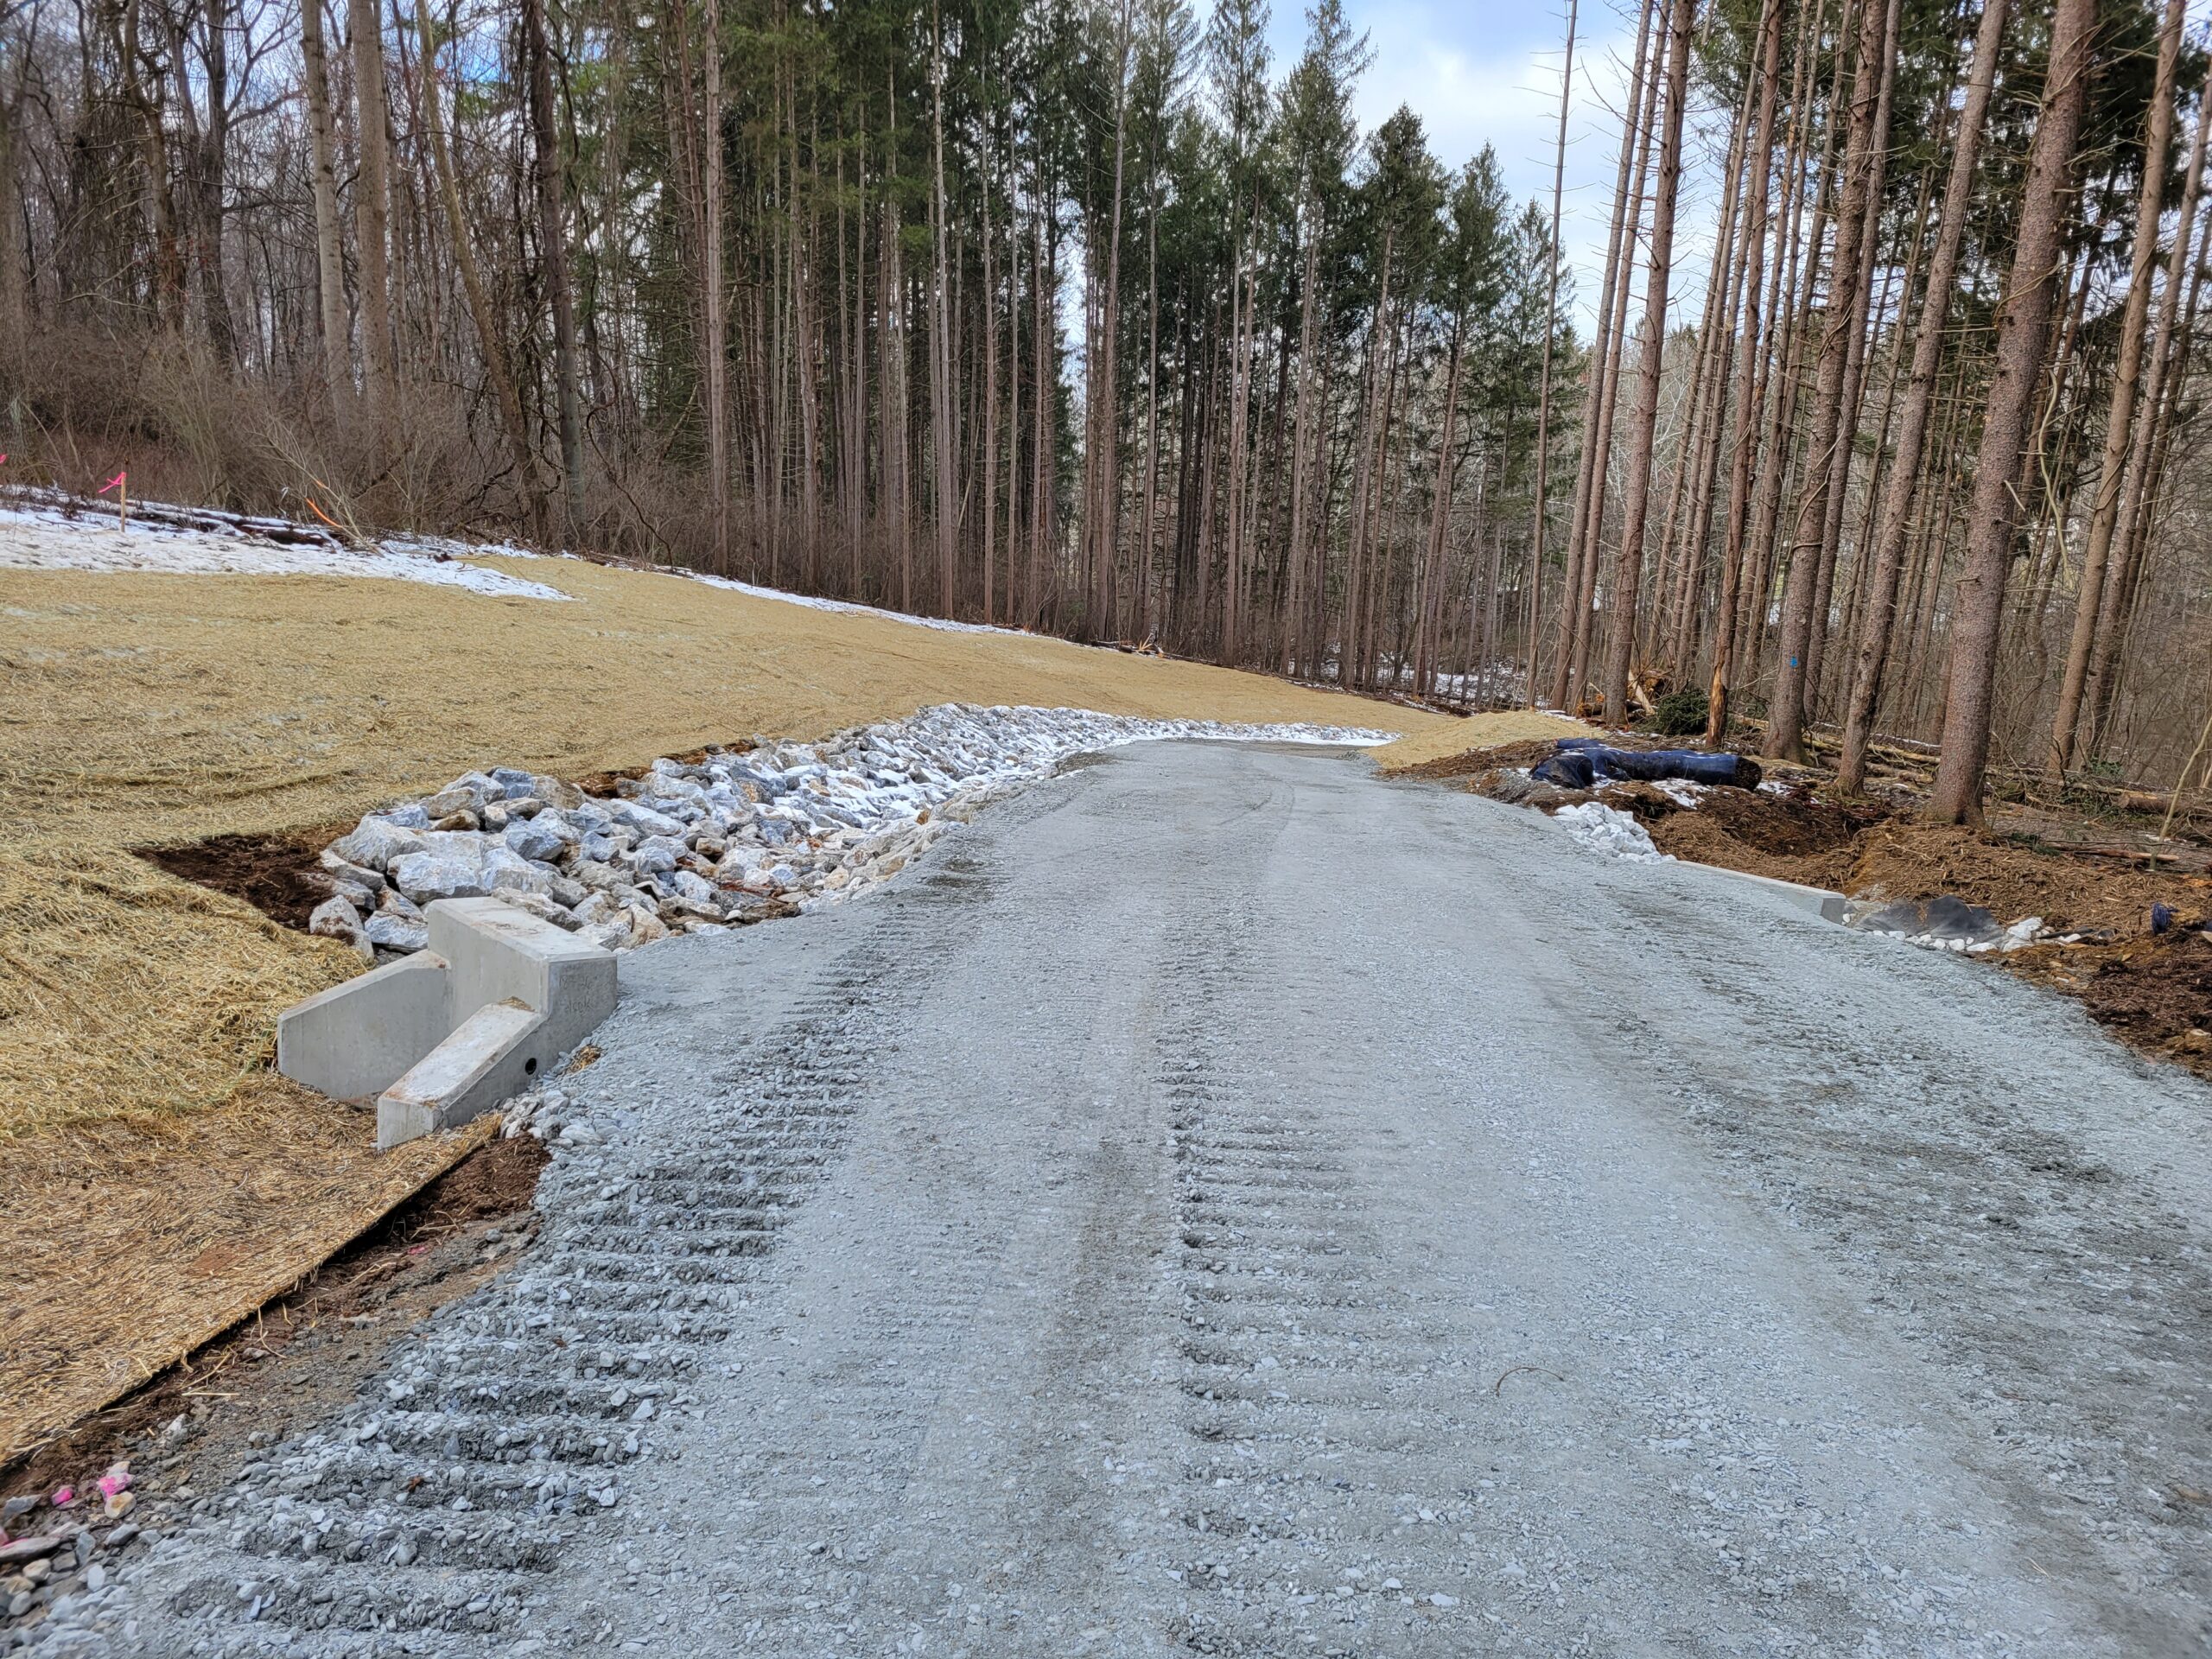 Our contractor completed the temporary access road work on January 14, 2022. The site is now in hibernation for the rest of the Winter until early Spring, when demolition work on the bridge will commence.